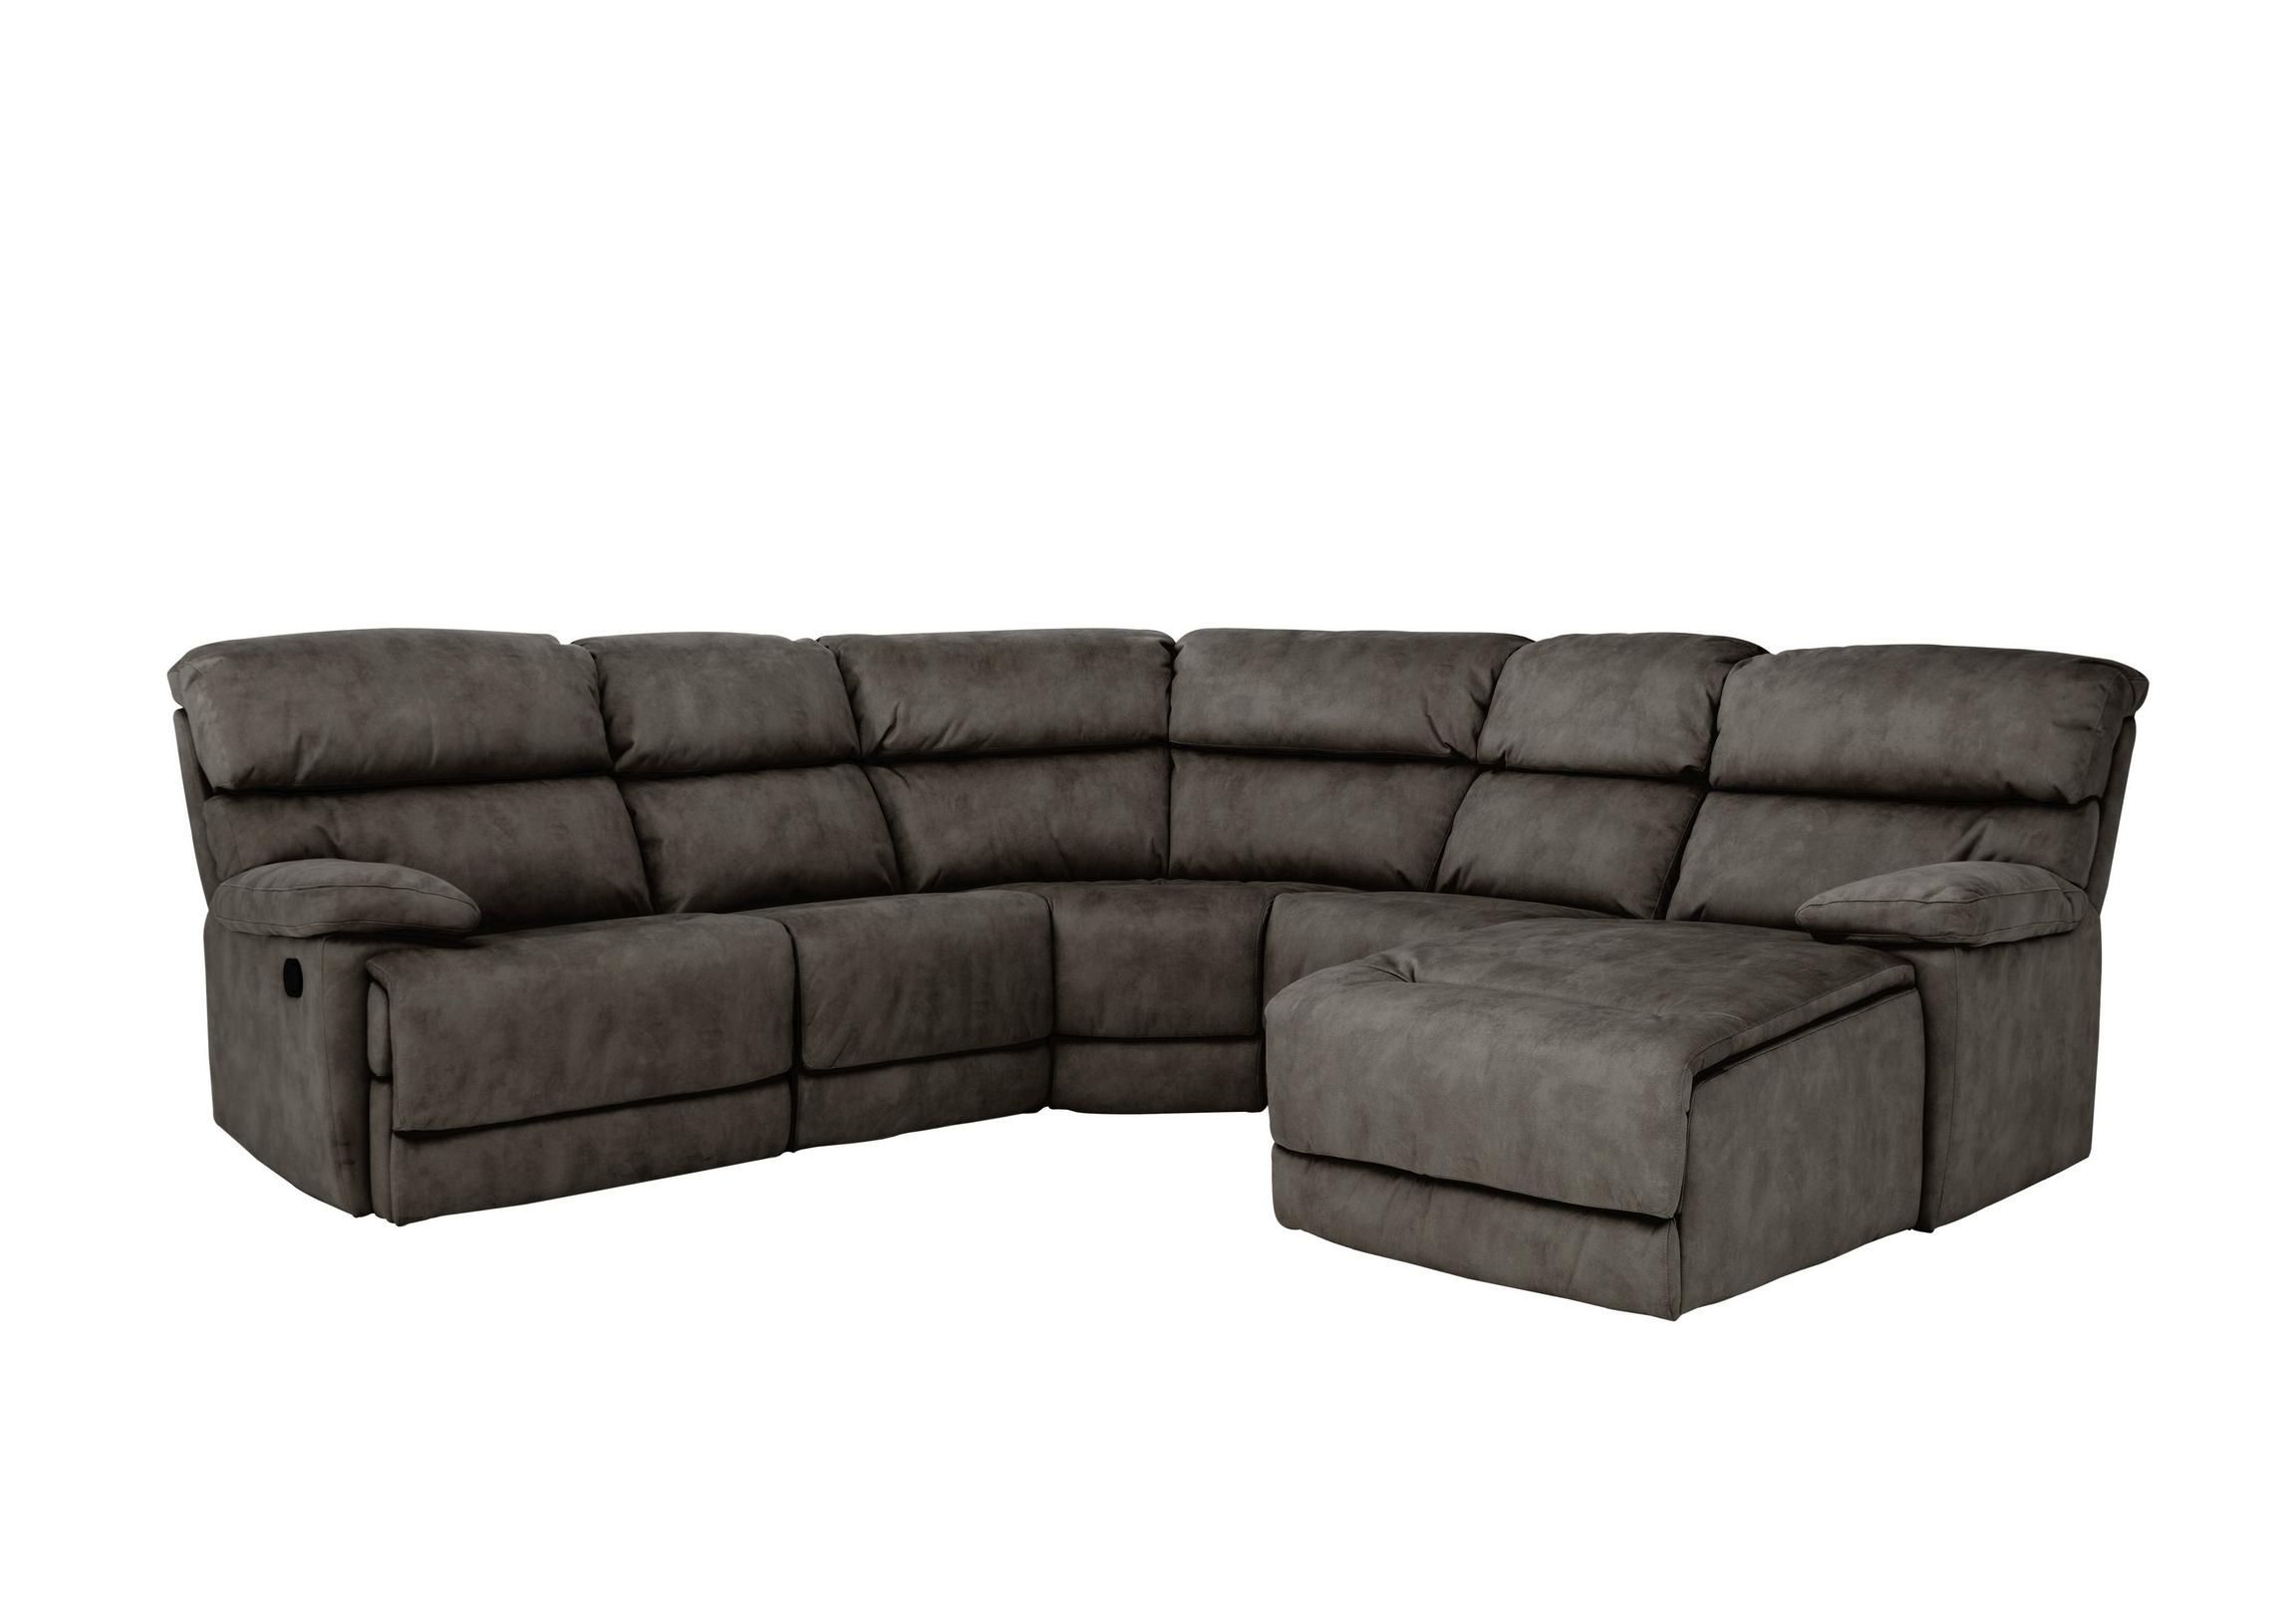 Beautifully Cushioned Fabric Corner Sofa Seats At Least 5 For Contempo Power Reclining Sofas (View 10 of 15)